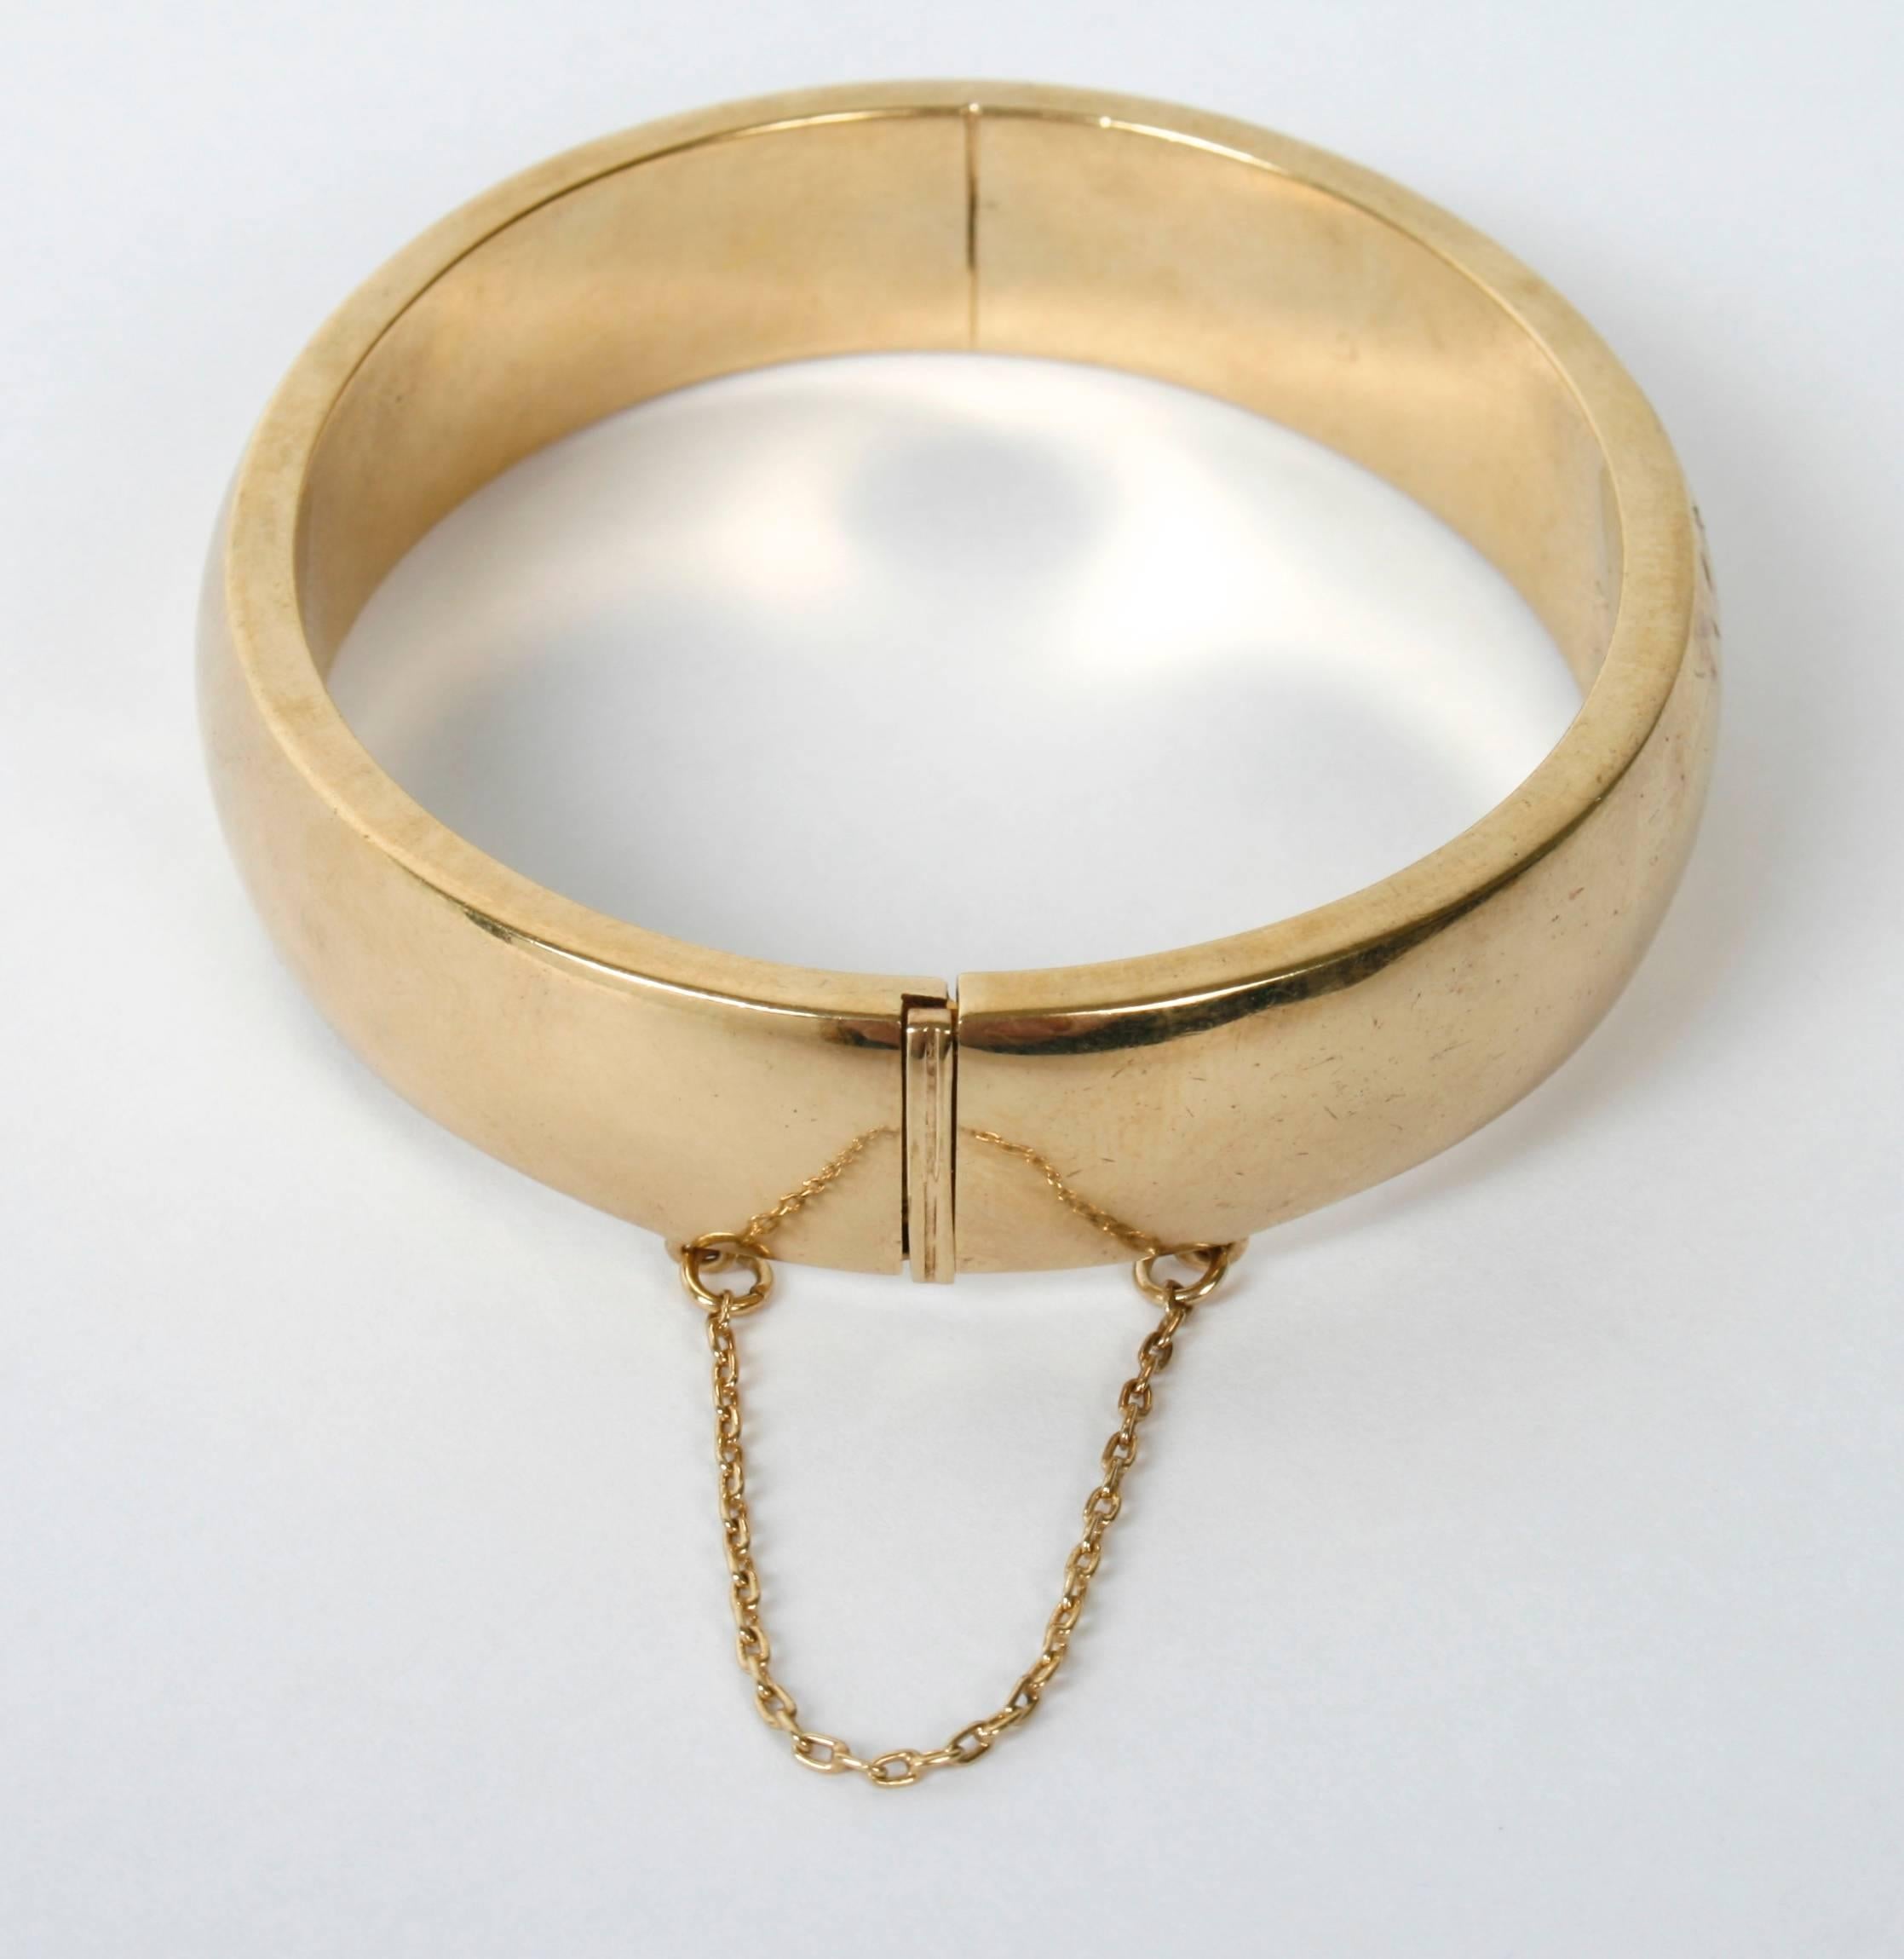 This gold plated sterling Silver bangle bracelet has an oval shape with squared off sides. It opens with an invisible hinge and a secure clasp that releases with a narrow push-bar. It also has a safety chain. The bracelet is marked ''925.'' It has a